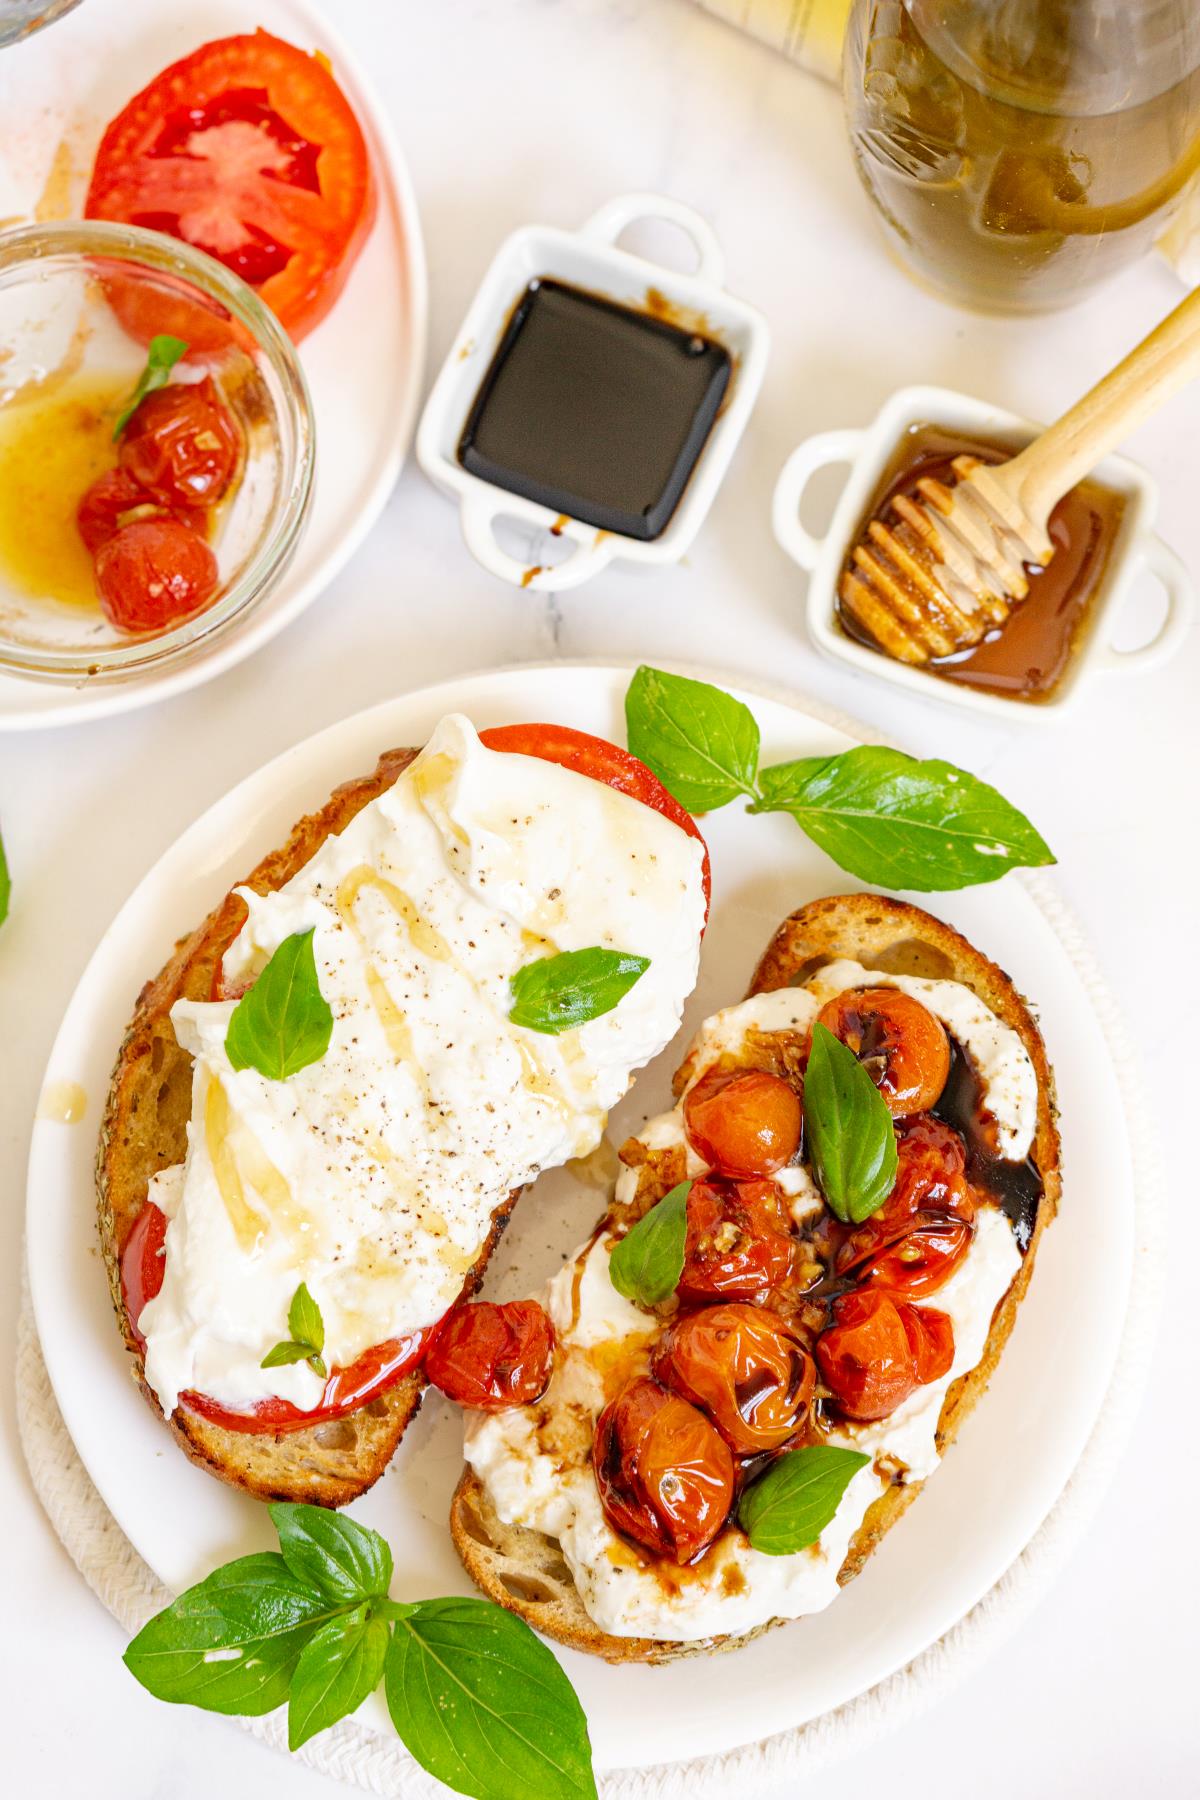 Plate of burrata toasts with toppings and garnishes on the side